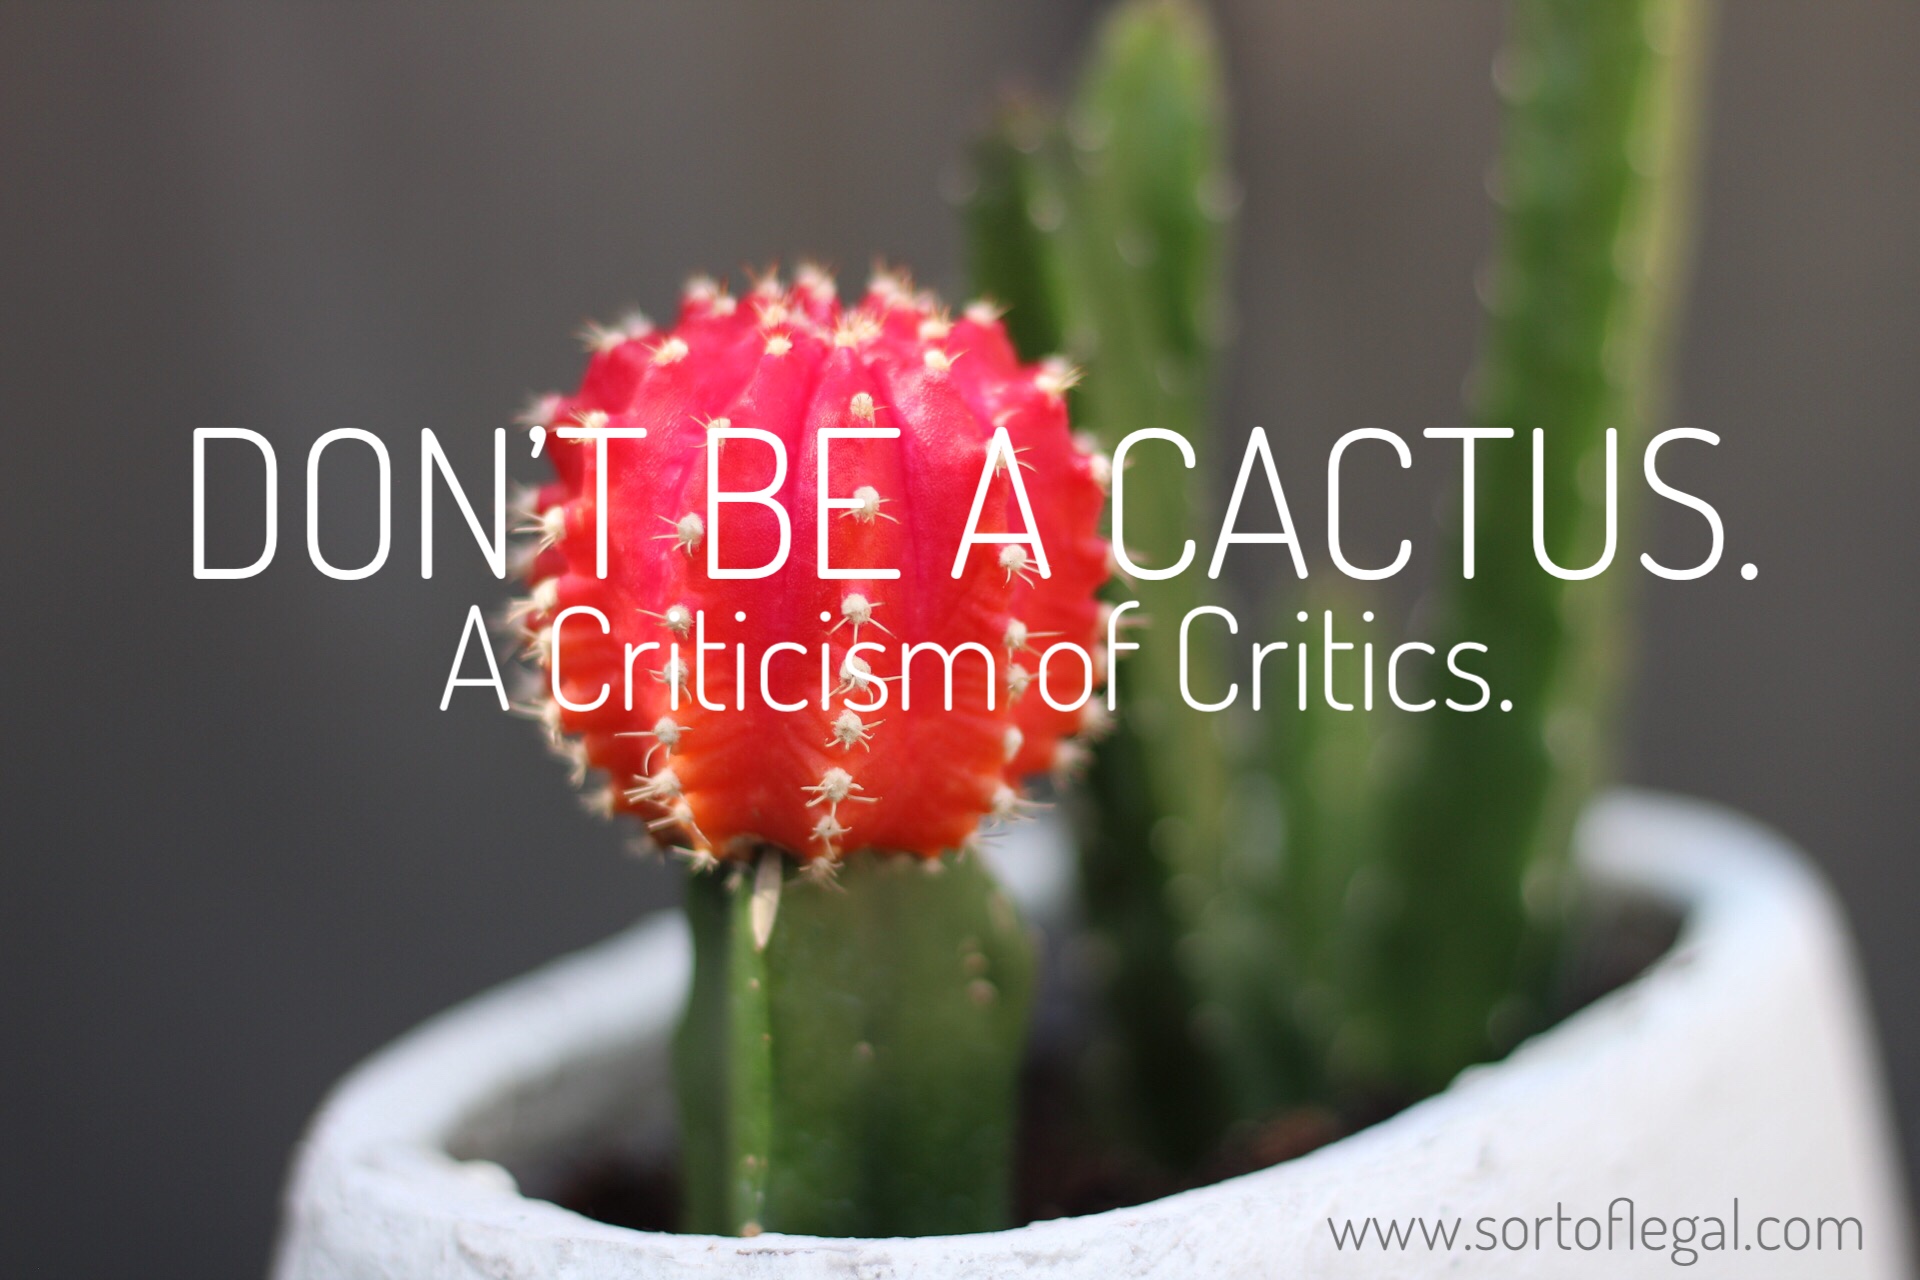 Don't be prickly like a cactus. Internet trolls are not cool.